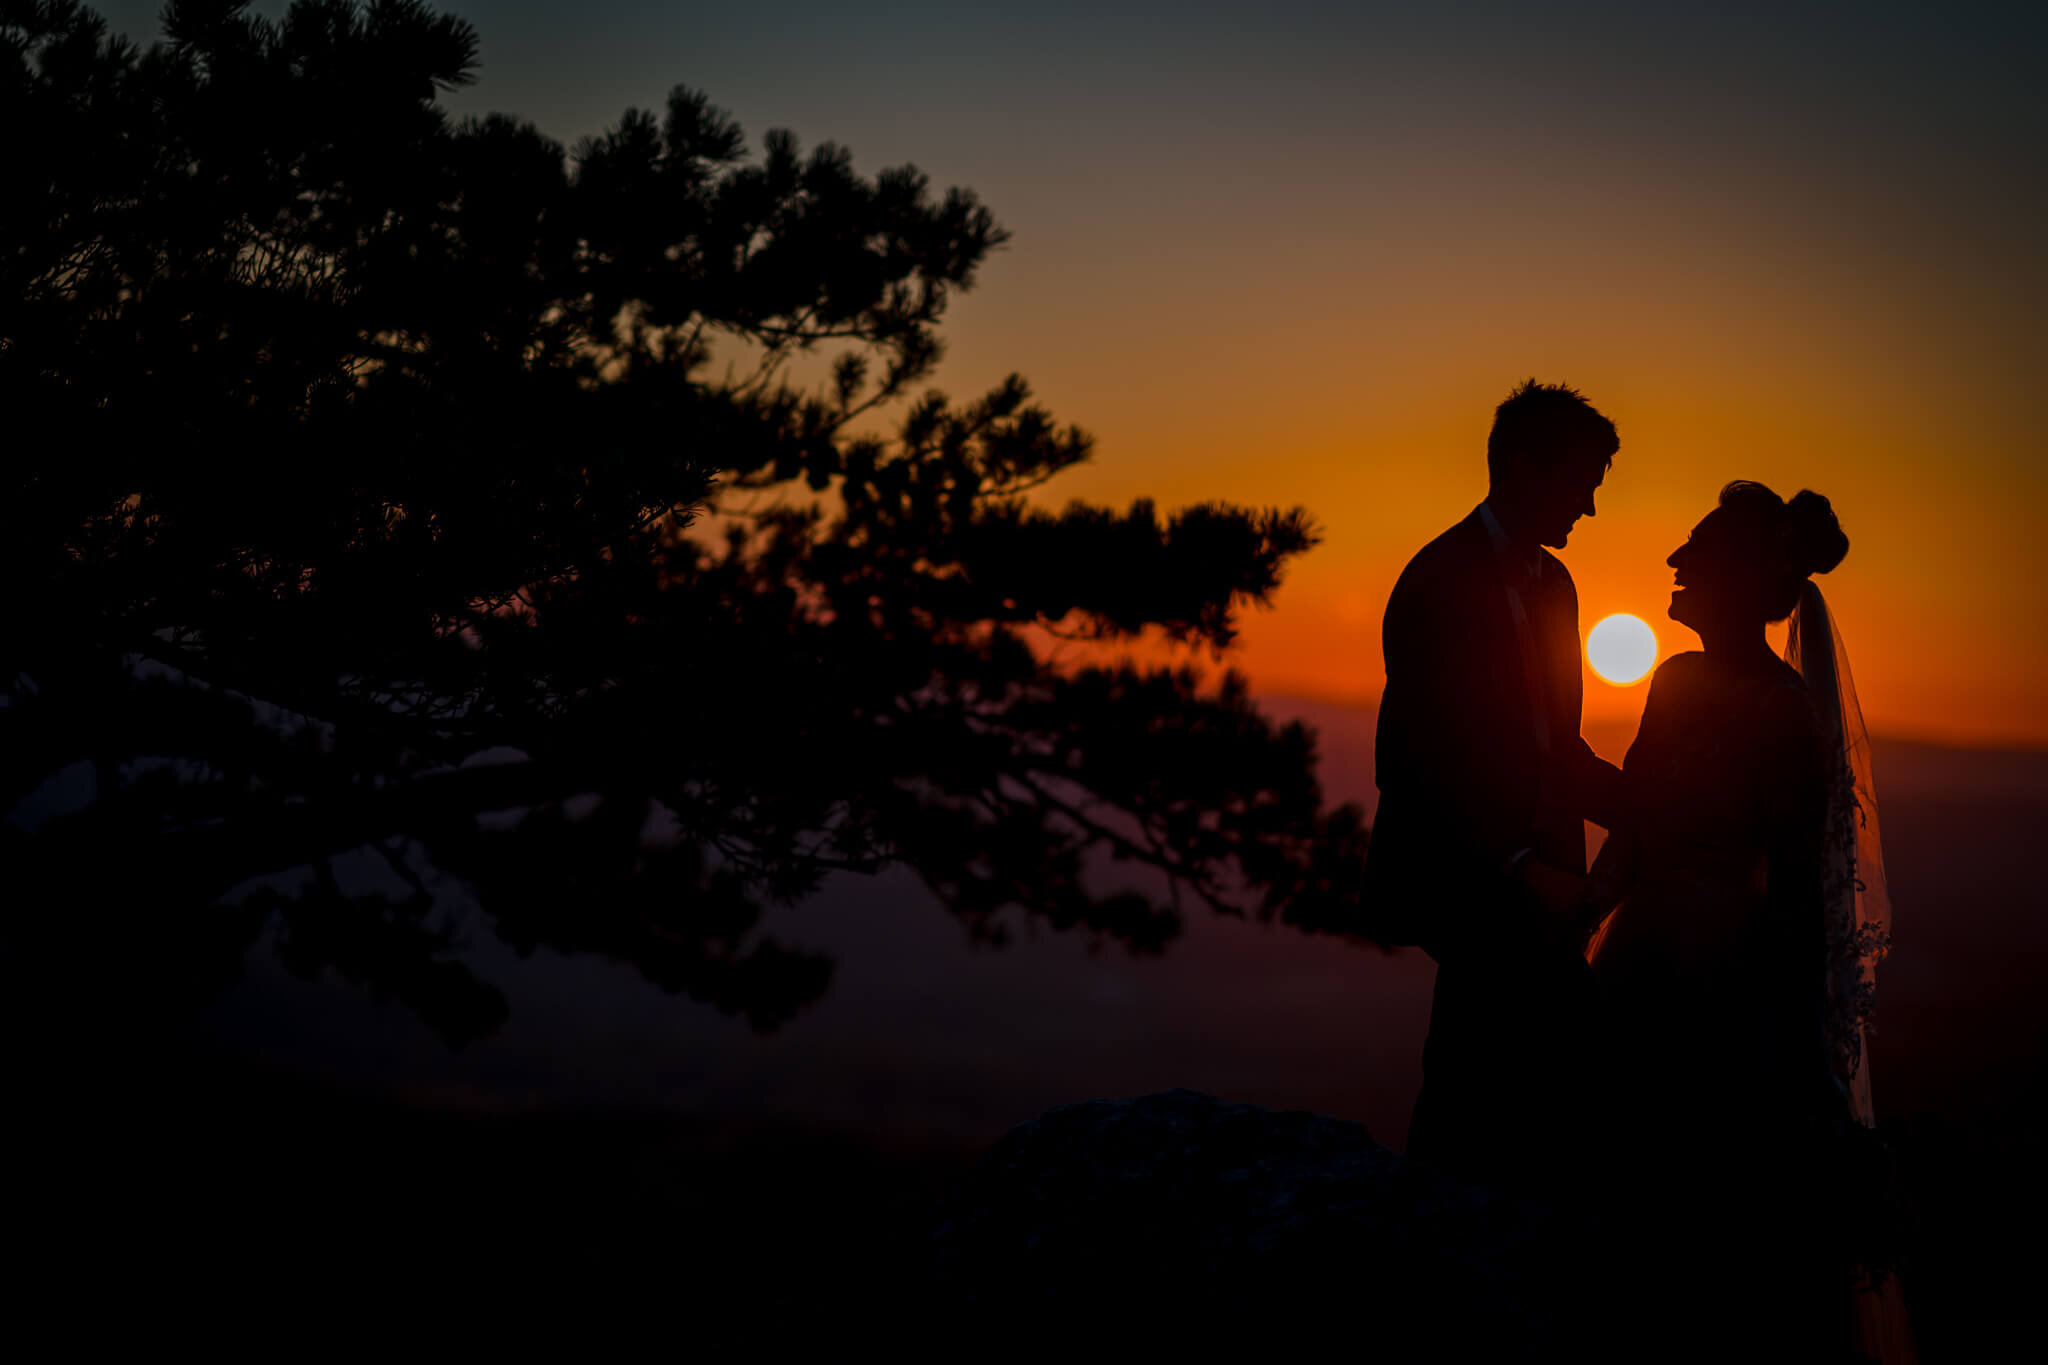 03-Ayla-Lee-Sugarloaf-Mountain-Elopement-Autumn-Wedding-Portraits-Photography-by-Bee-Two-Sweet-89.jpg